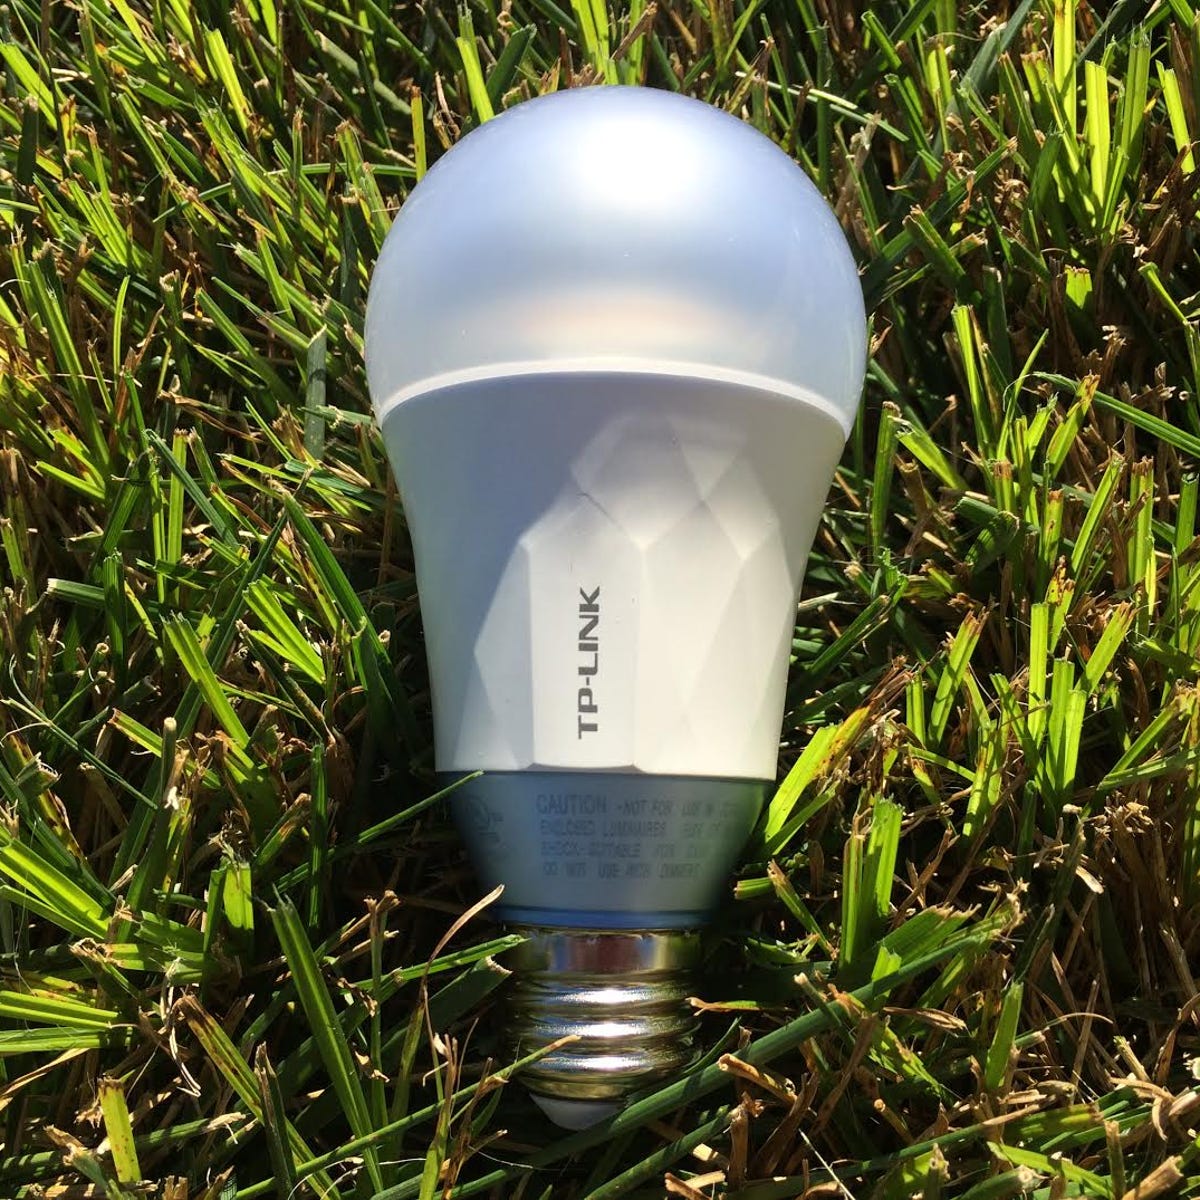 muscle Hold Meekness TP-Link LB120 Smart Wi-Fi LED Bulb with Tunable White Light review: TP-Link  introduces affordable, Alexa-ready smart bulbs -- no hub needed - CNET